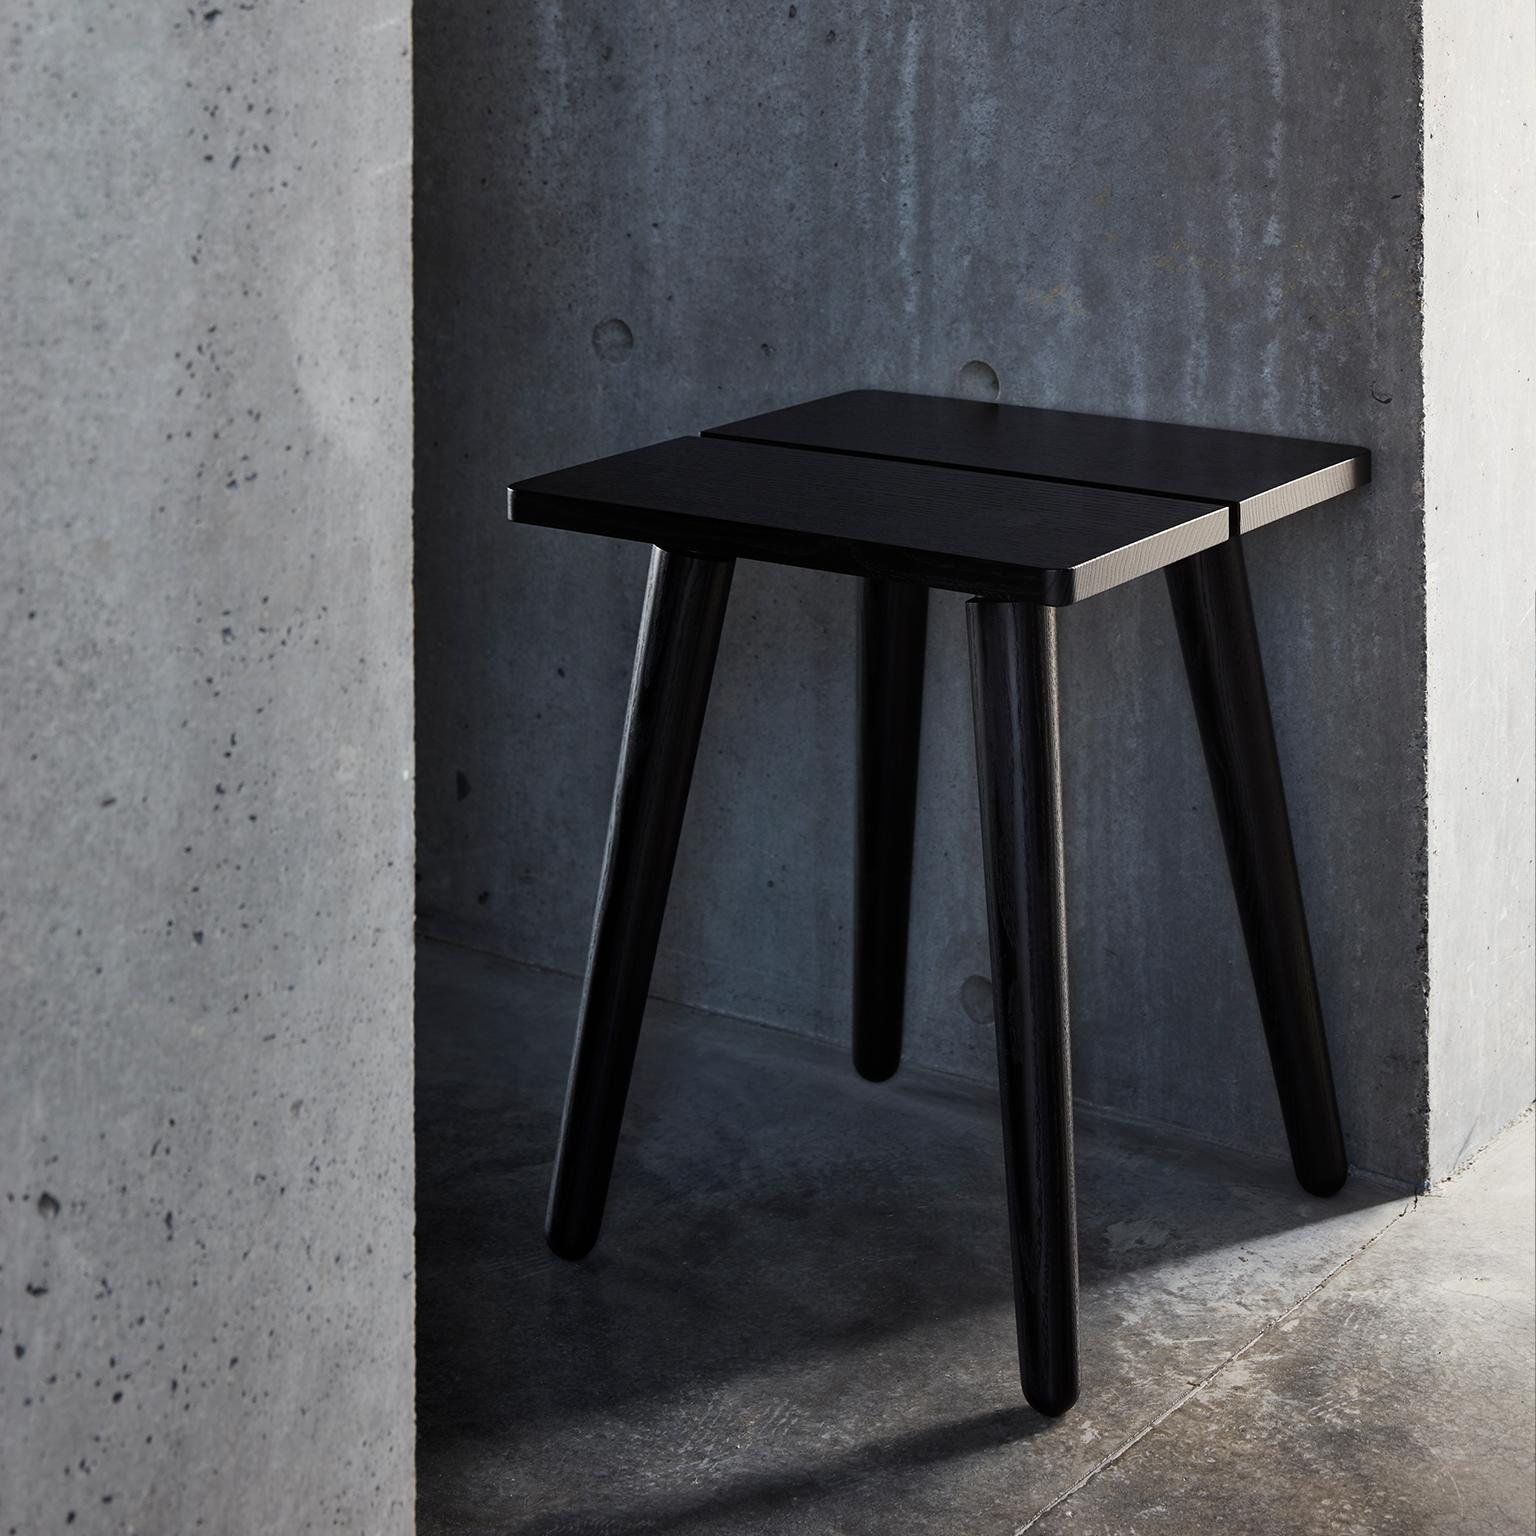 The Stabellenstuhl, or stabile stool, is our modern take on a Swiss staple-found inside any Alpine home. Its 100% solid European ash seat is held together by turned legs and strong joinery. Any weight applied to the seat gains extra stability